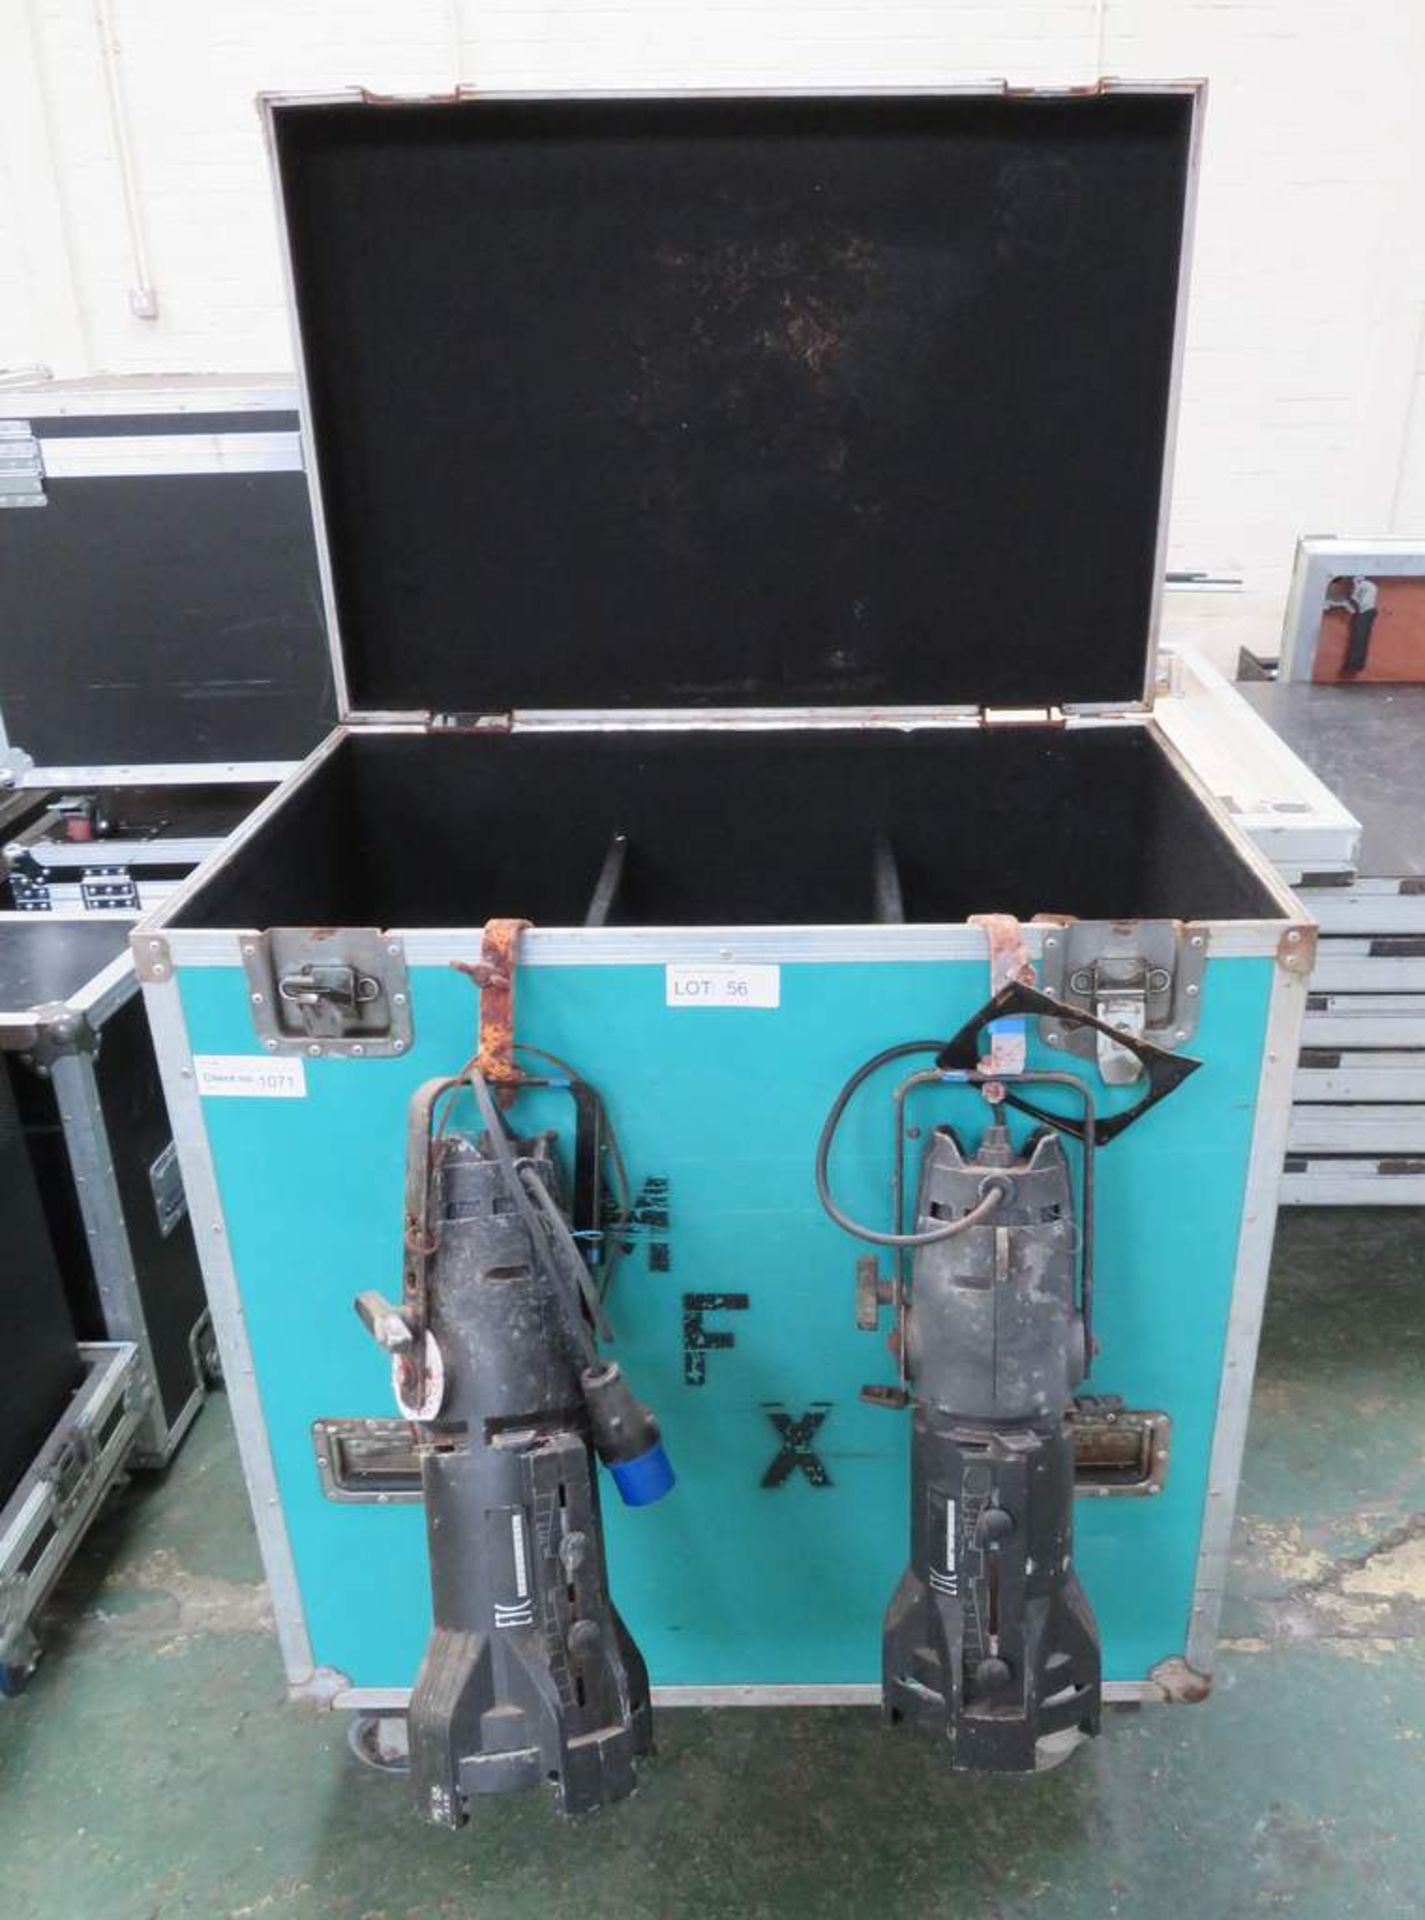 Divided flightcase containing 5 Source 4 junior zooms - Water Damaged